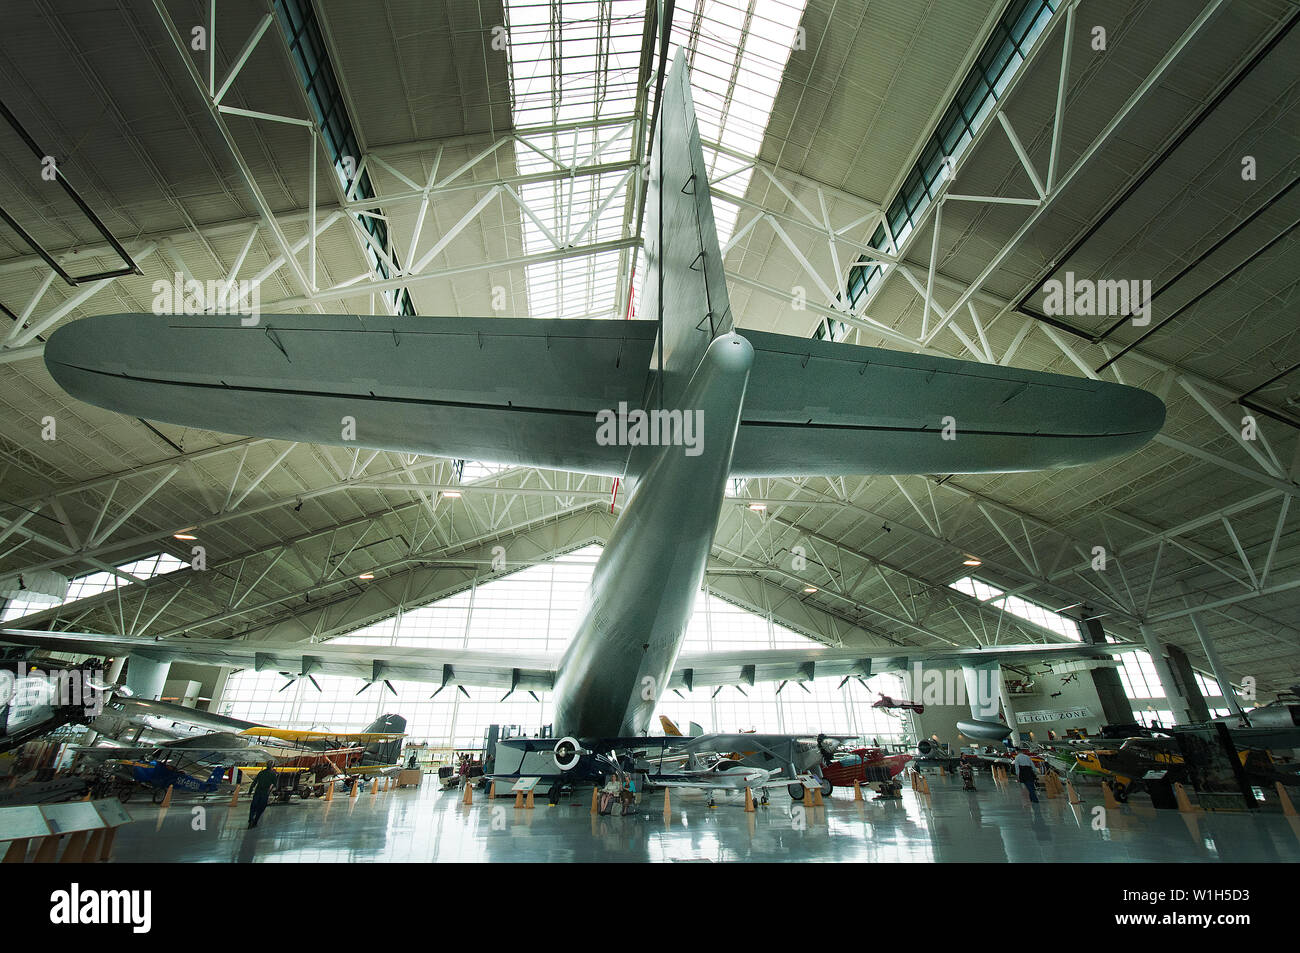 The famed Spruce Goose takes up nearly the entire hangar at the Evergreen Air and Space Museum near McMinnville, Oregon. (c) 2012 Tom Kelly Stock Photo